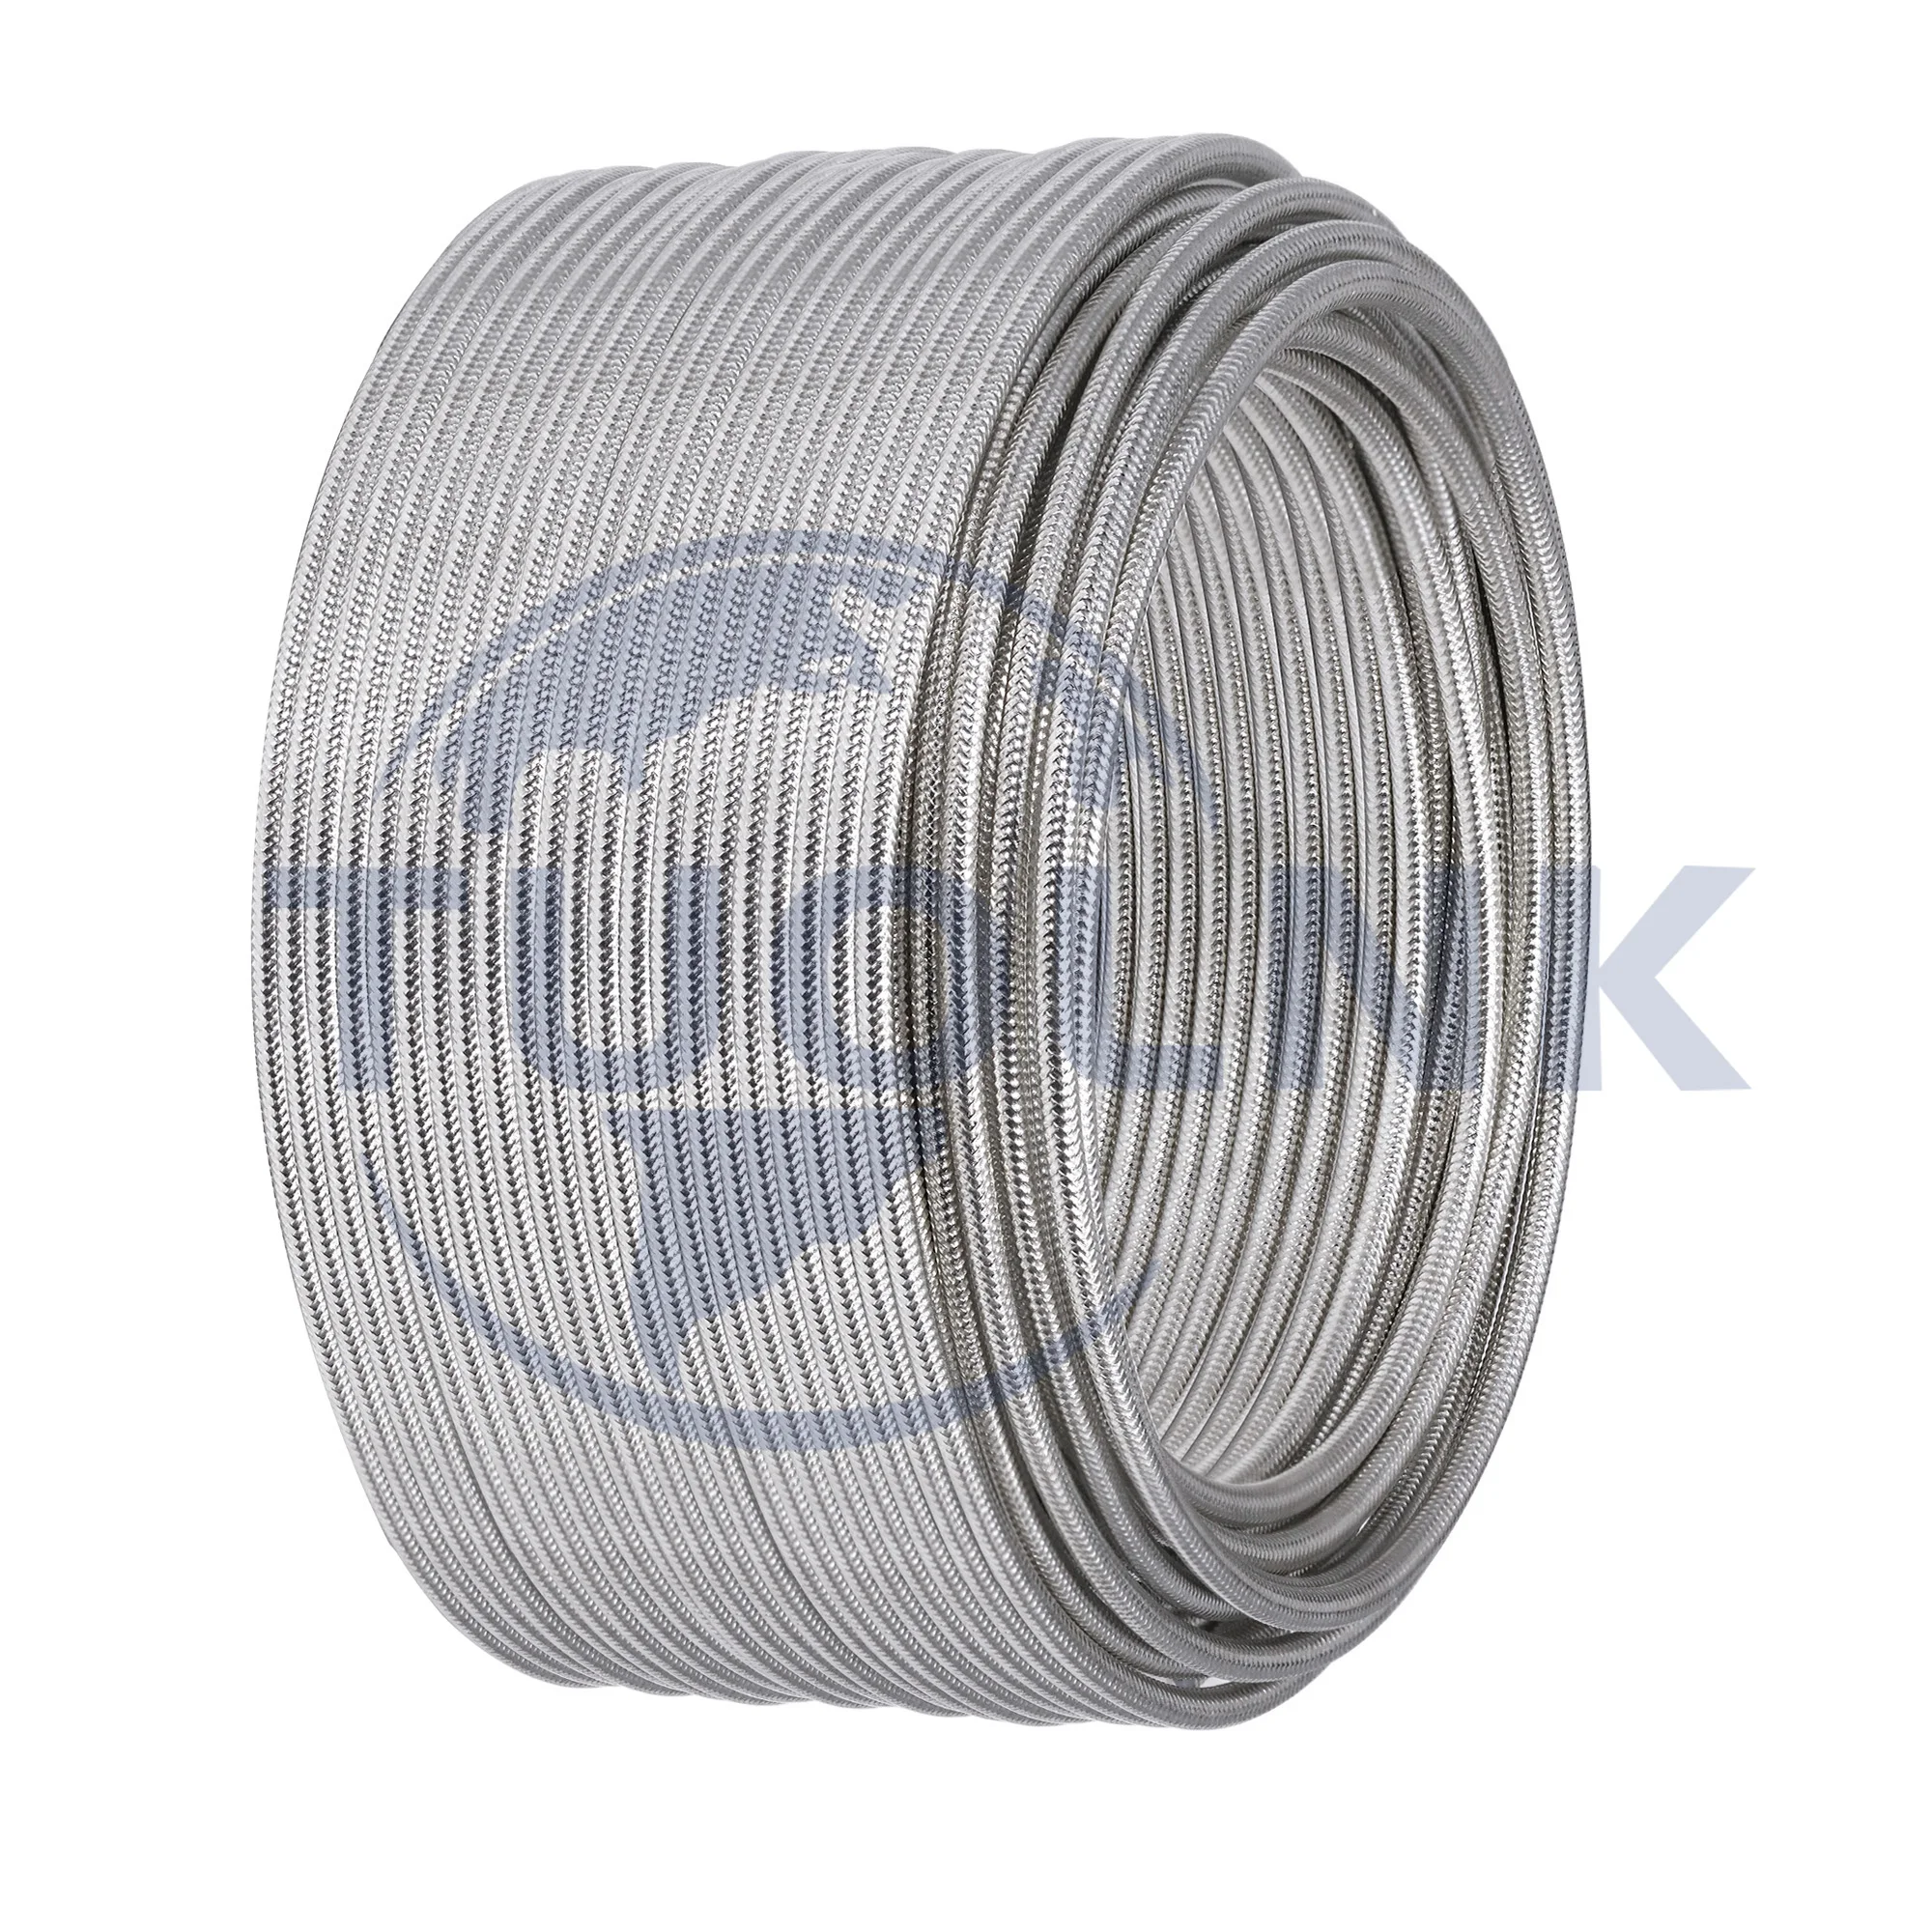 RG402 50ohm Semi-Flexible Coaxial Cable with Tinned Copper Tube Jacket 0.141 50ohm 5m 10m 15m 20m 30m Silver